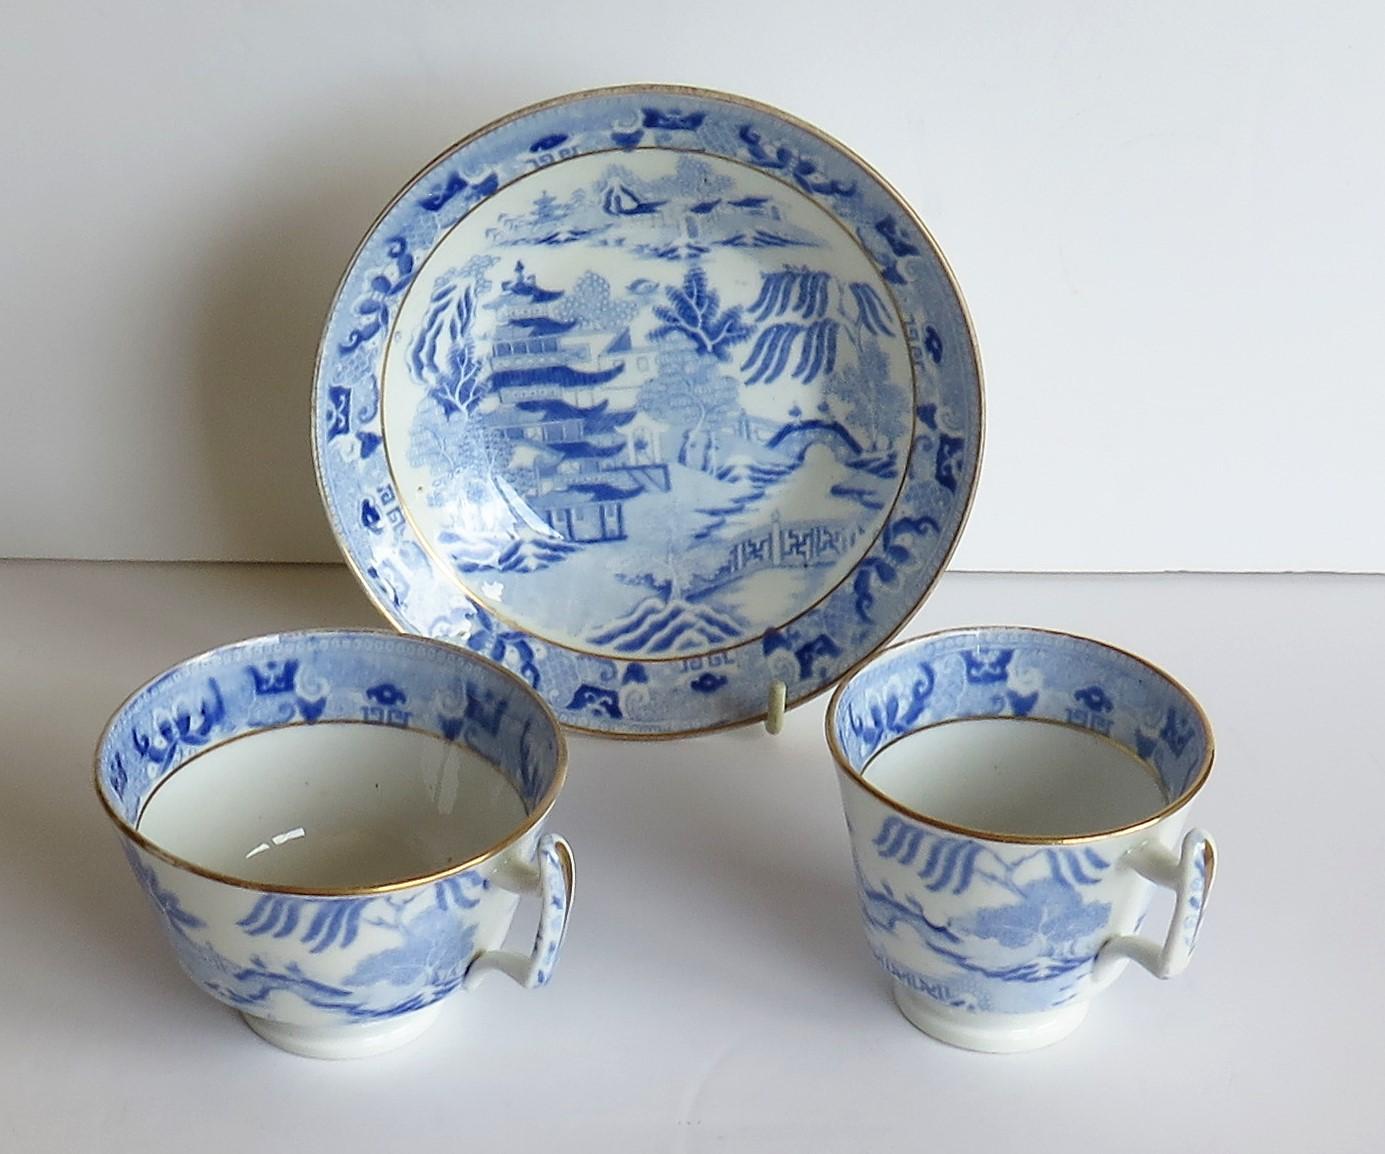 This is a Porcelain blue and white, hand gilded trio comprising tea Ccup, coffee cup and saucer made by Miles Mason (Mason's), Staffordshire Potteries, in the early 19th century, circa 1812-1820.

All pieces are well potted with the cups having